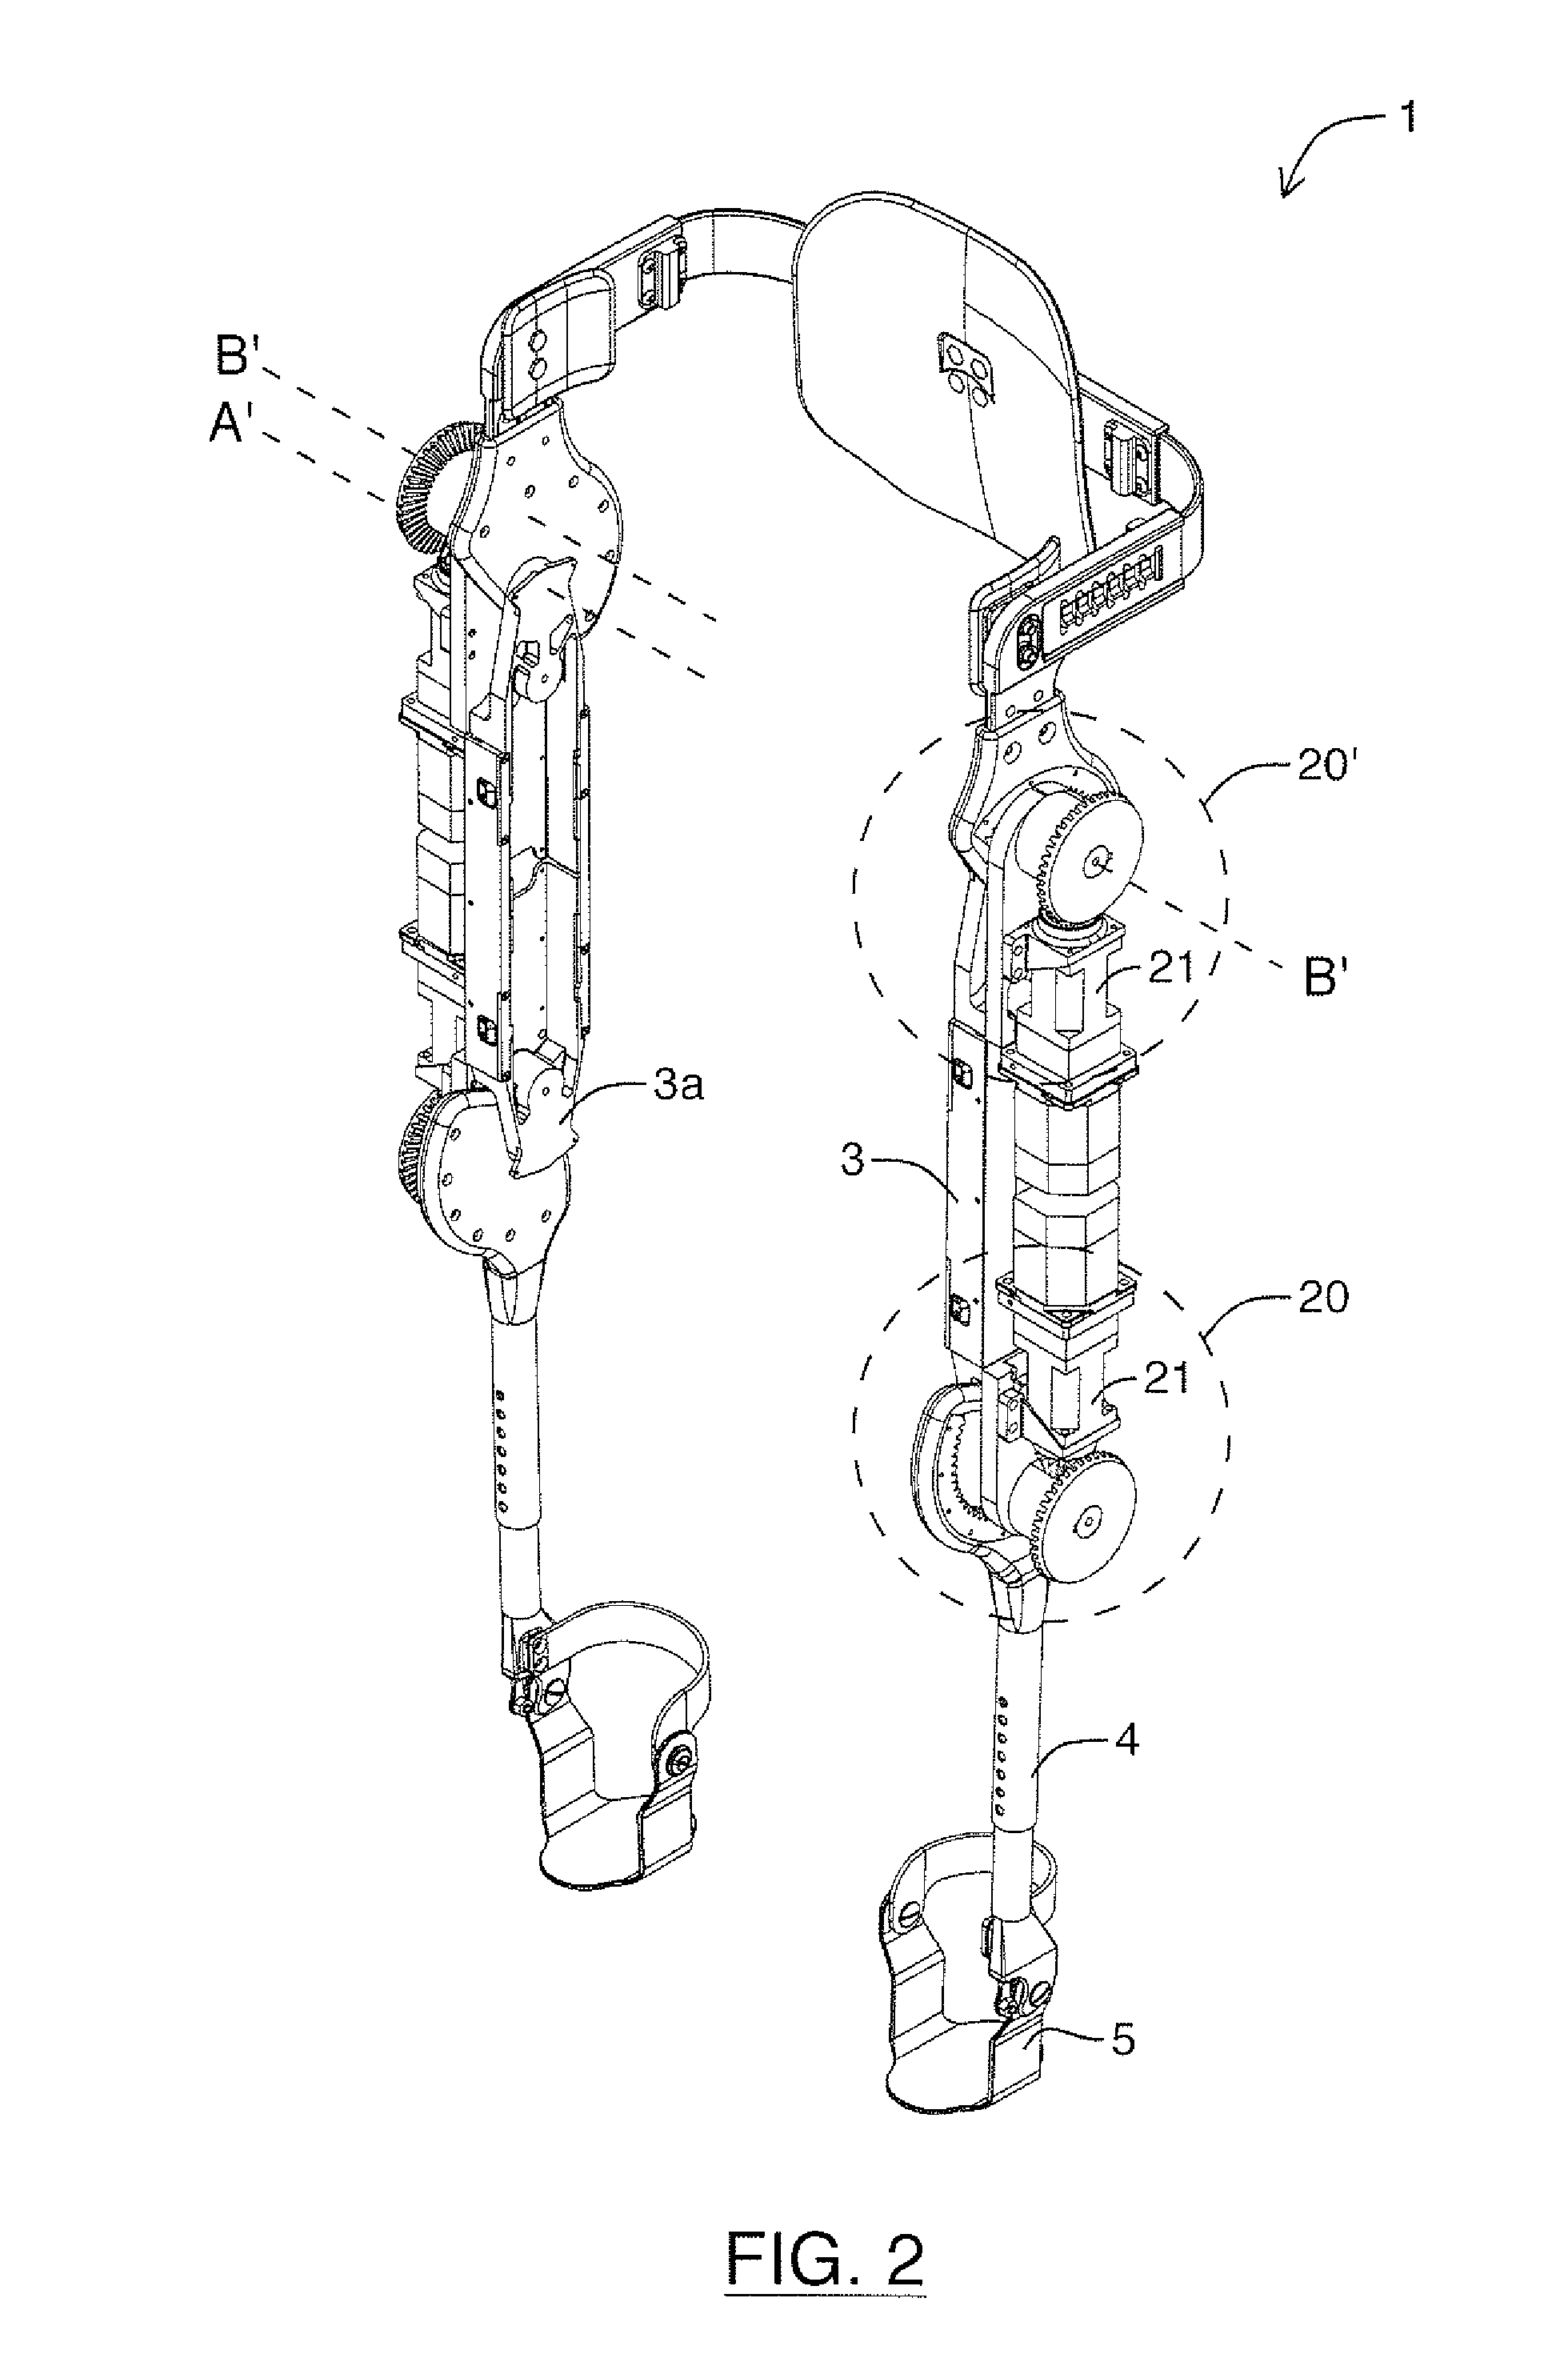 Transmission assembly for use in an exoskeleton apparatus